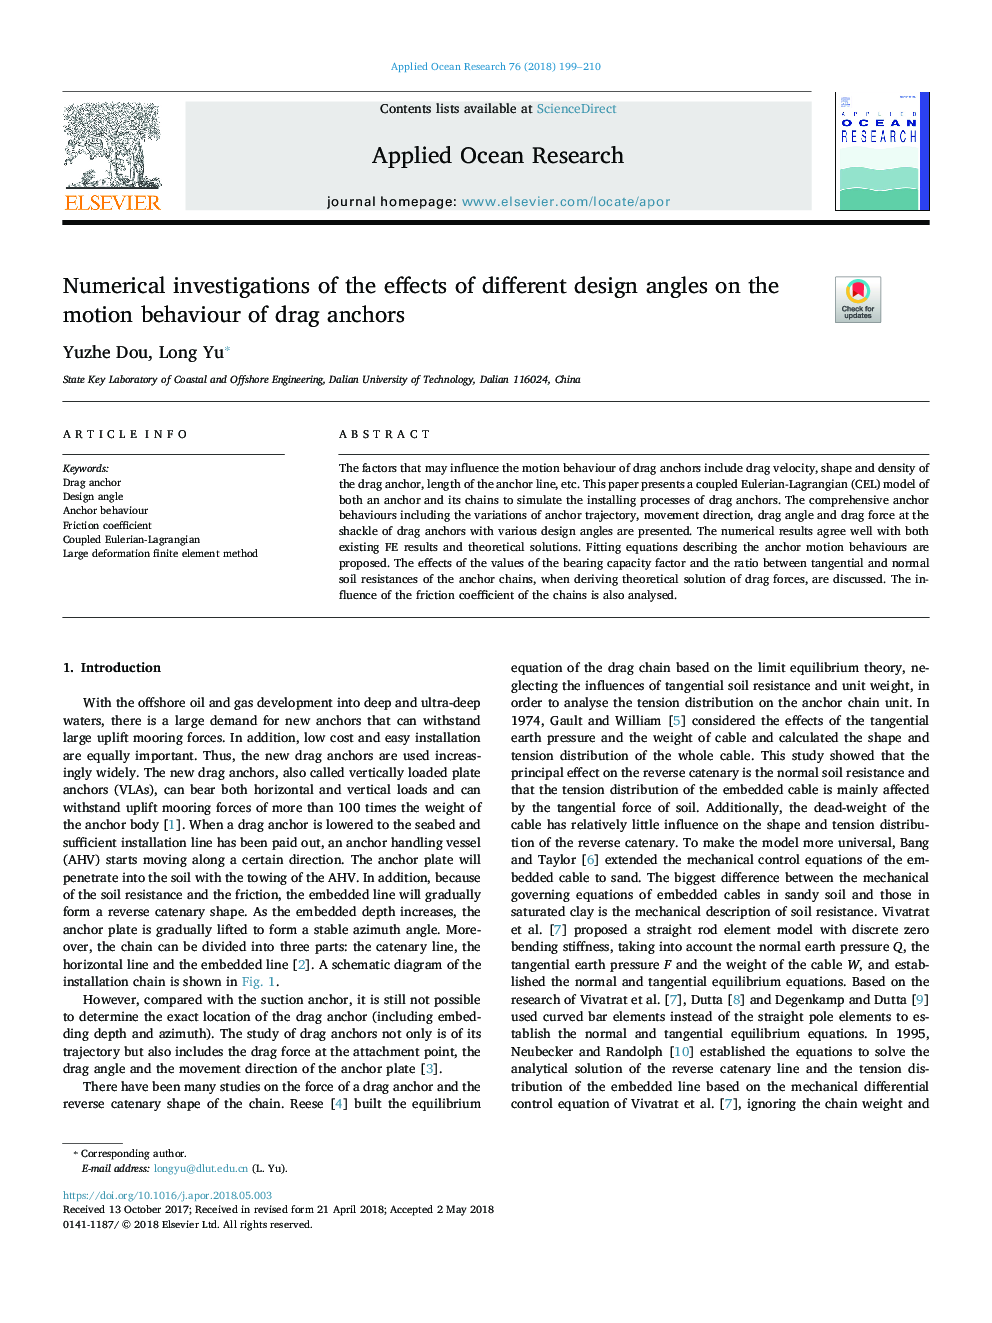 Numerical investigations of the effects of different design angles on the motion behaviour of drag anchors